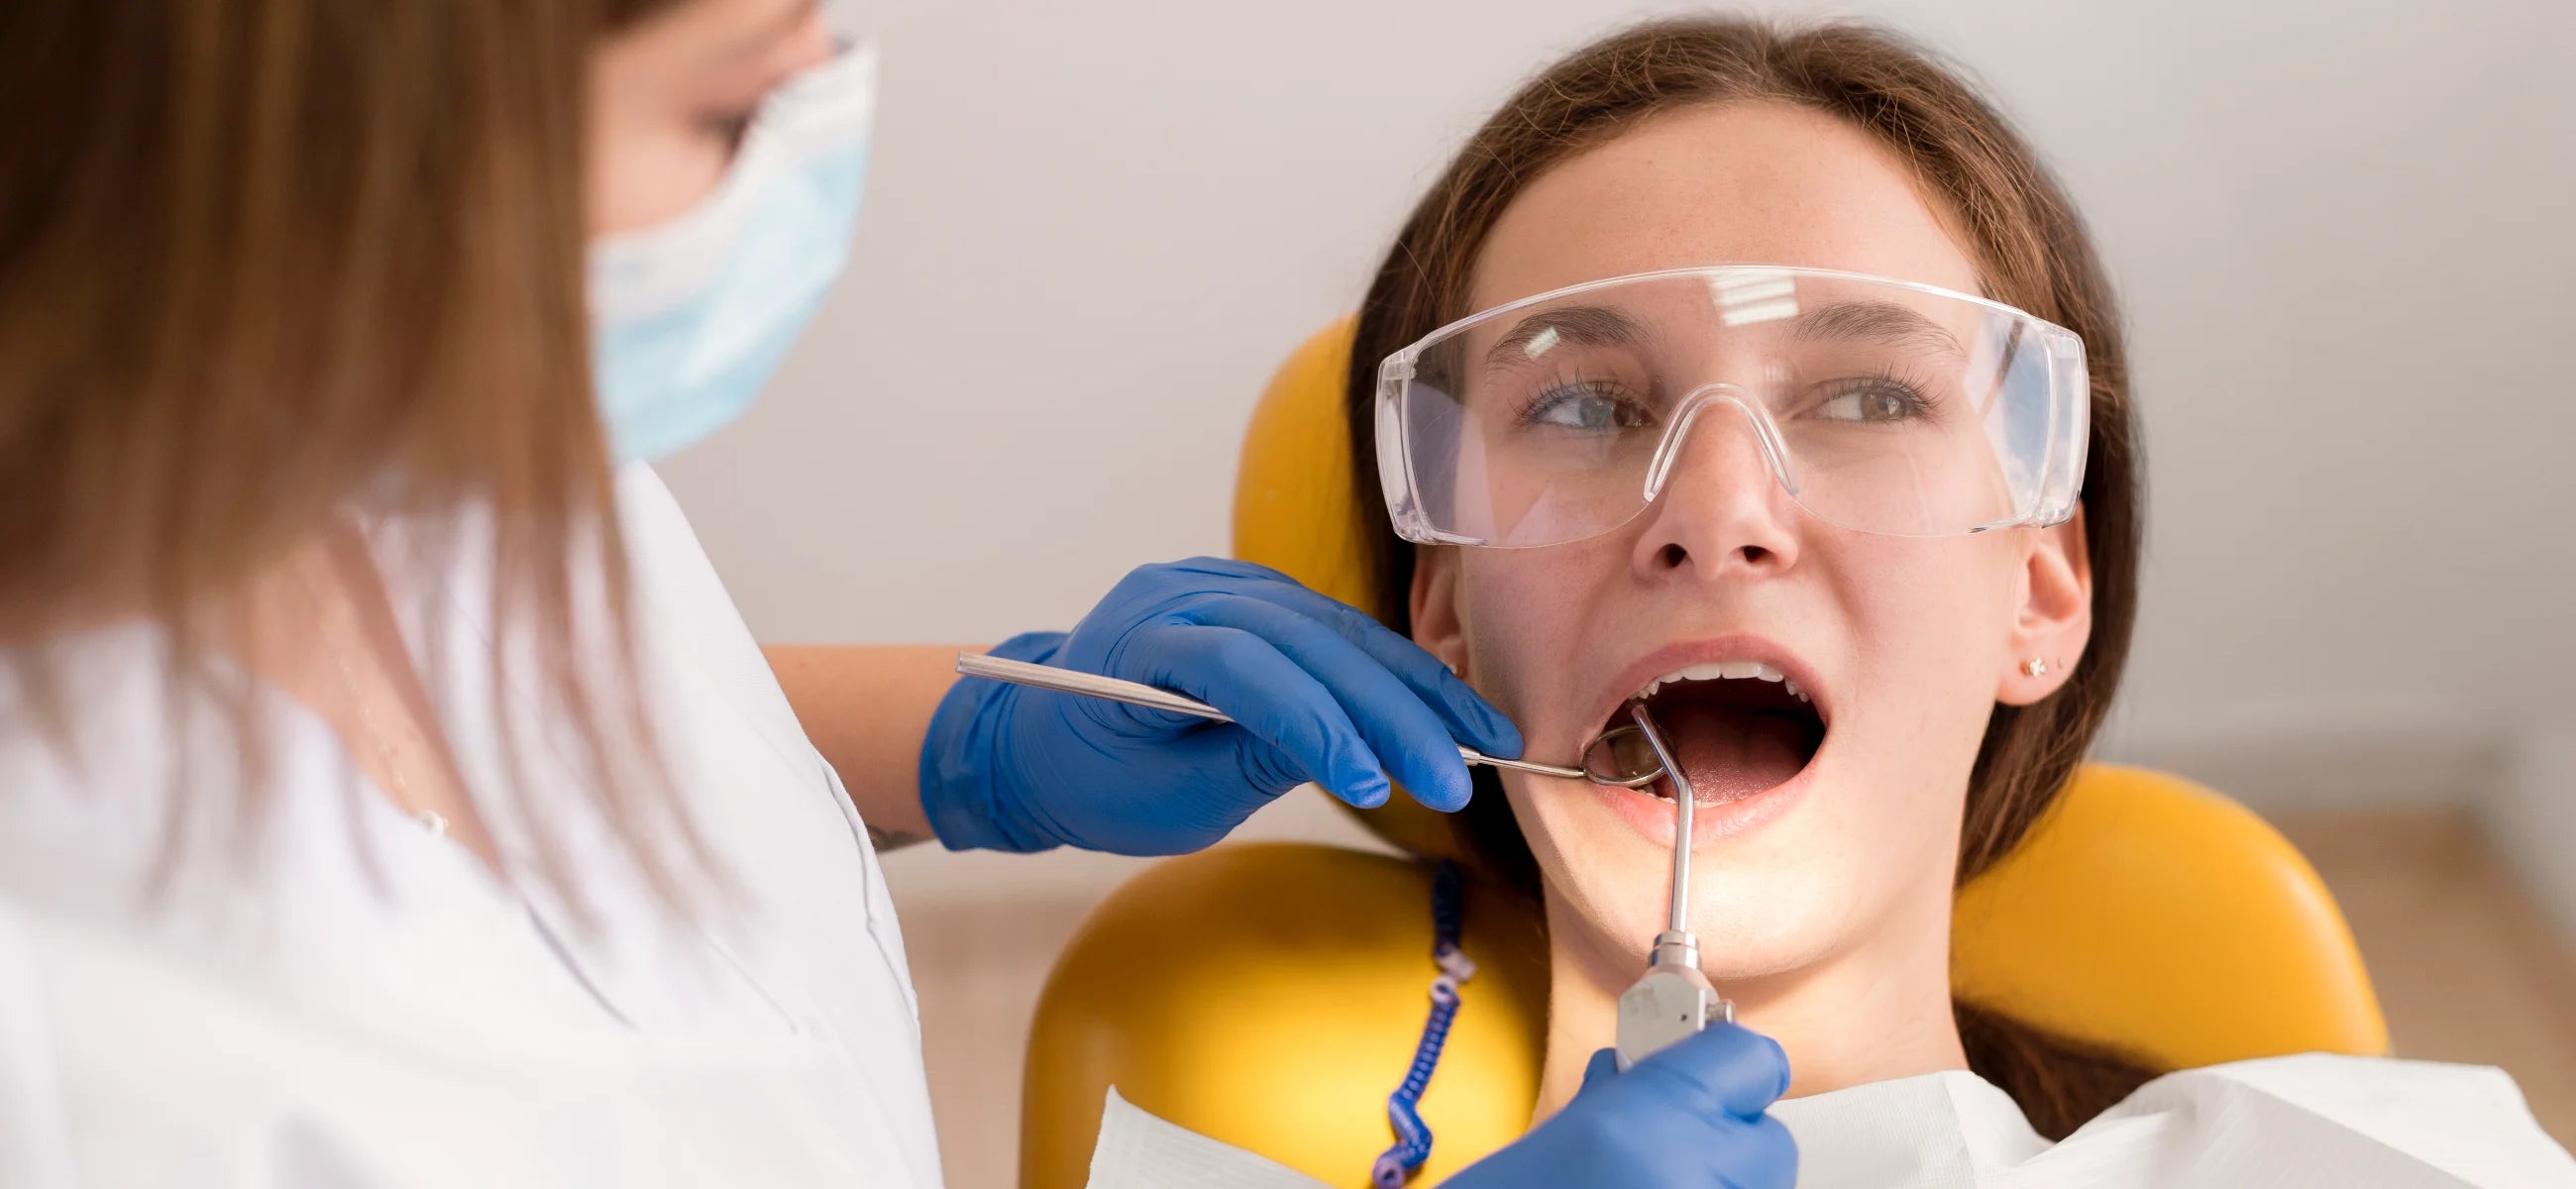 9 wisdom teeth removal FAQs - everything you need to know about this procedure 